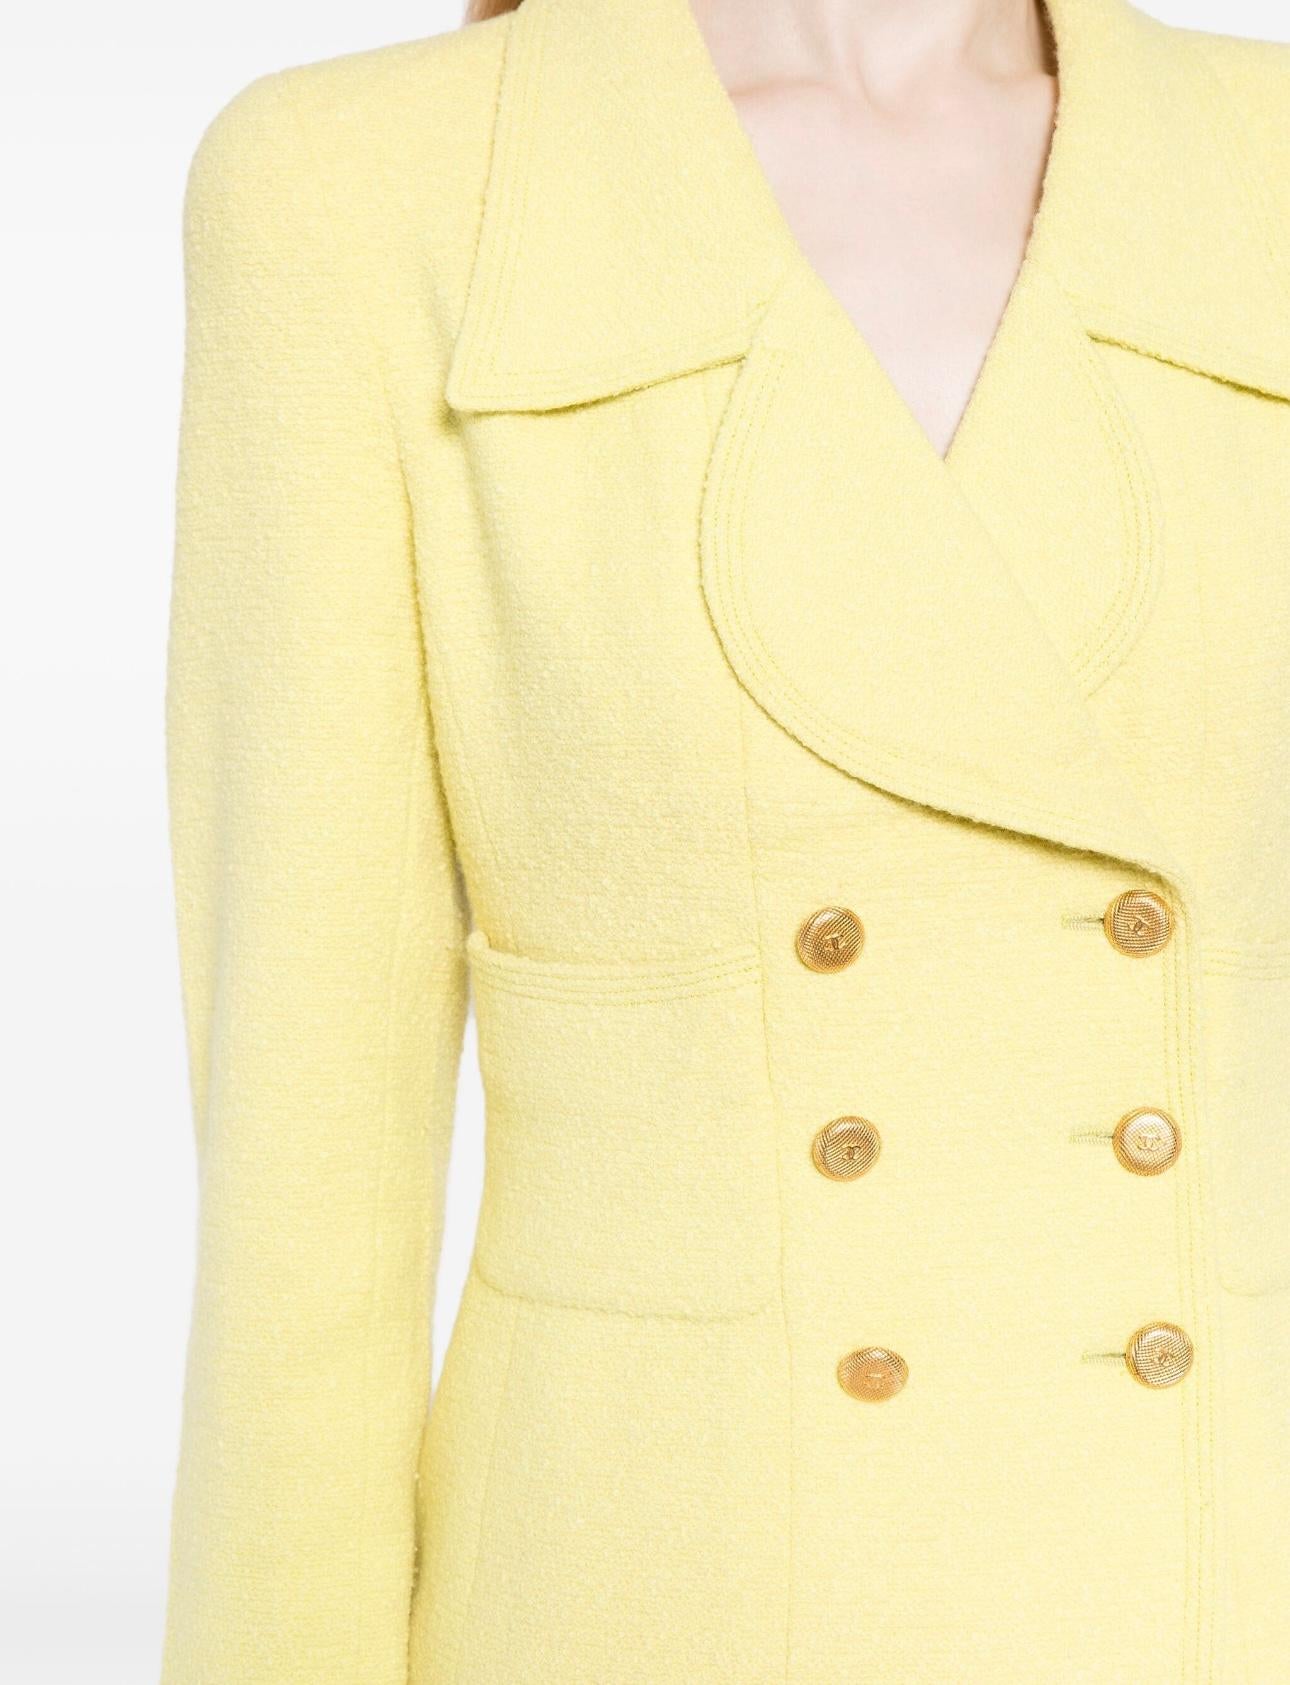 Women's or Men's Chanel Collectible Vintage Lime Yellow Tweed Suit